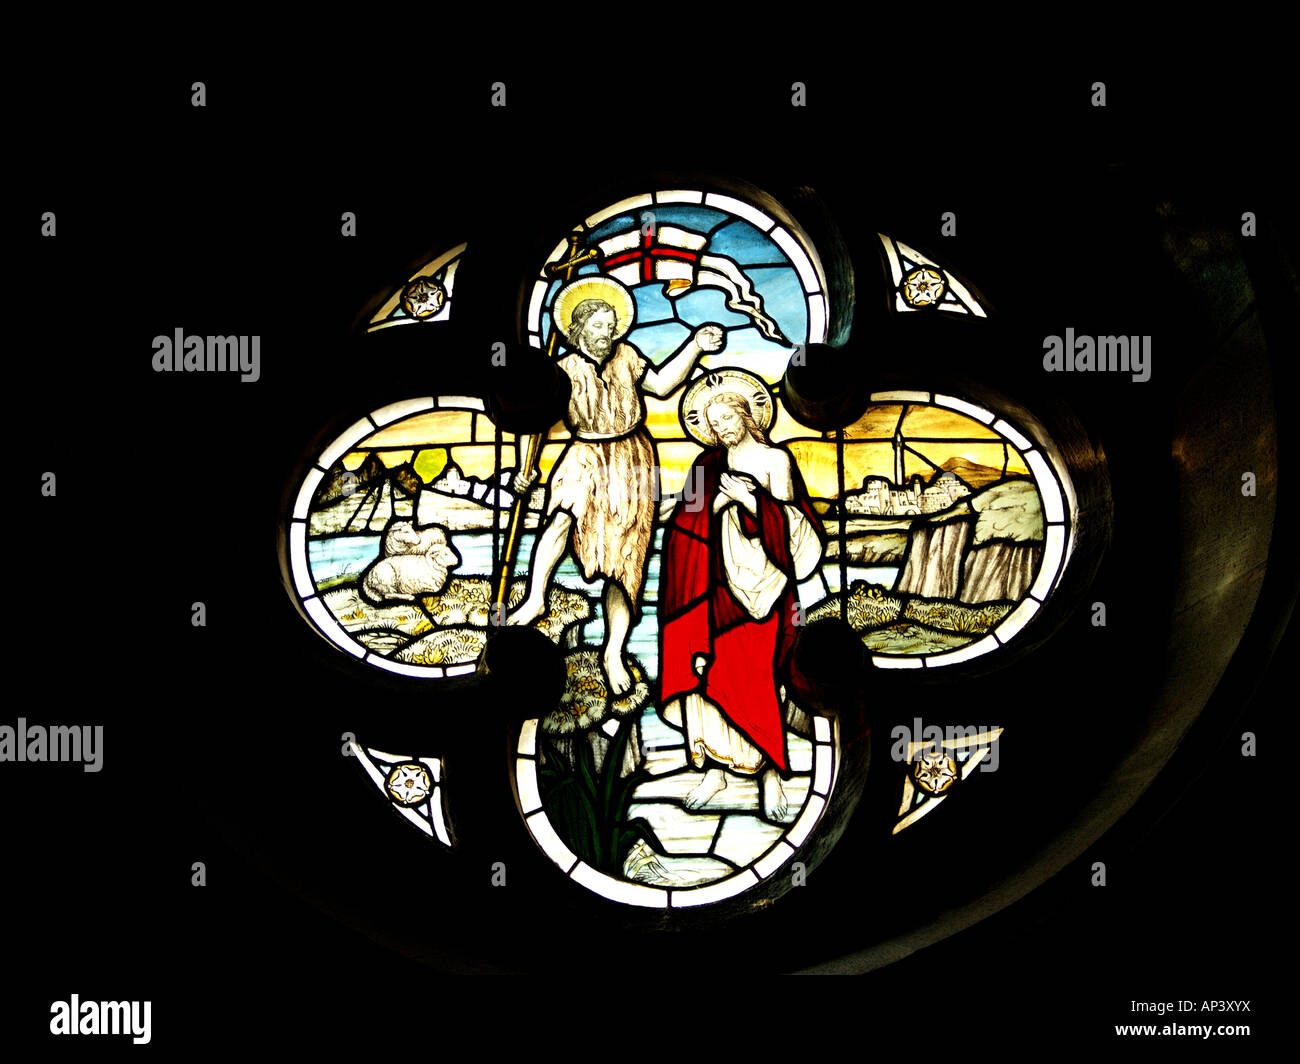 Stain glass window. St.Michael and All Angels Church. Bude, Cornwall, UK Stock Photo